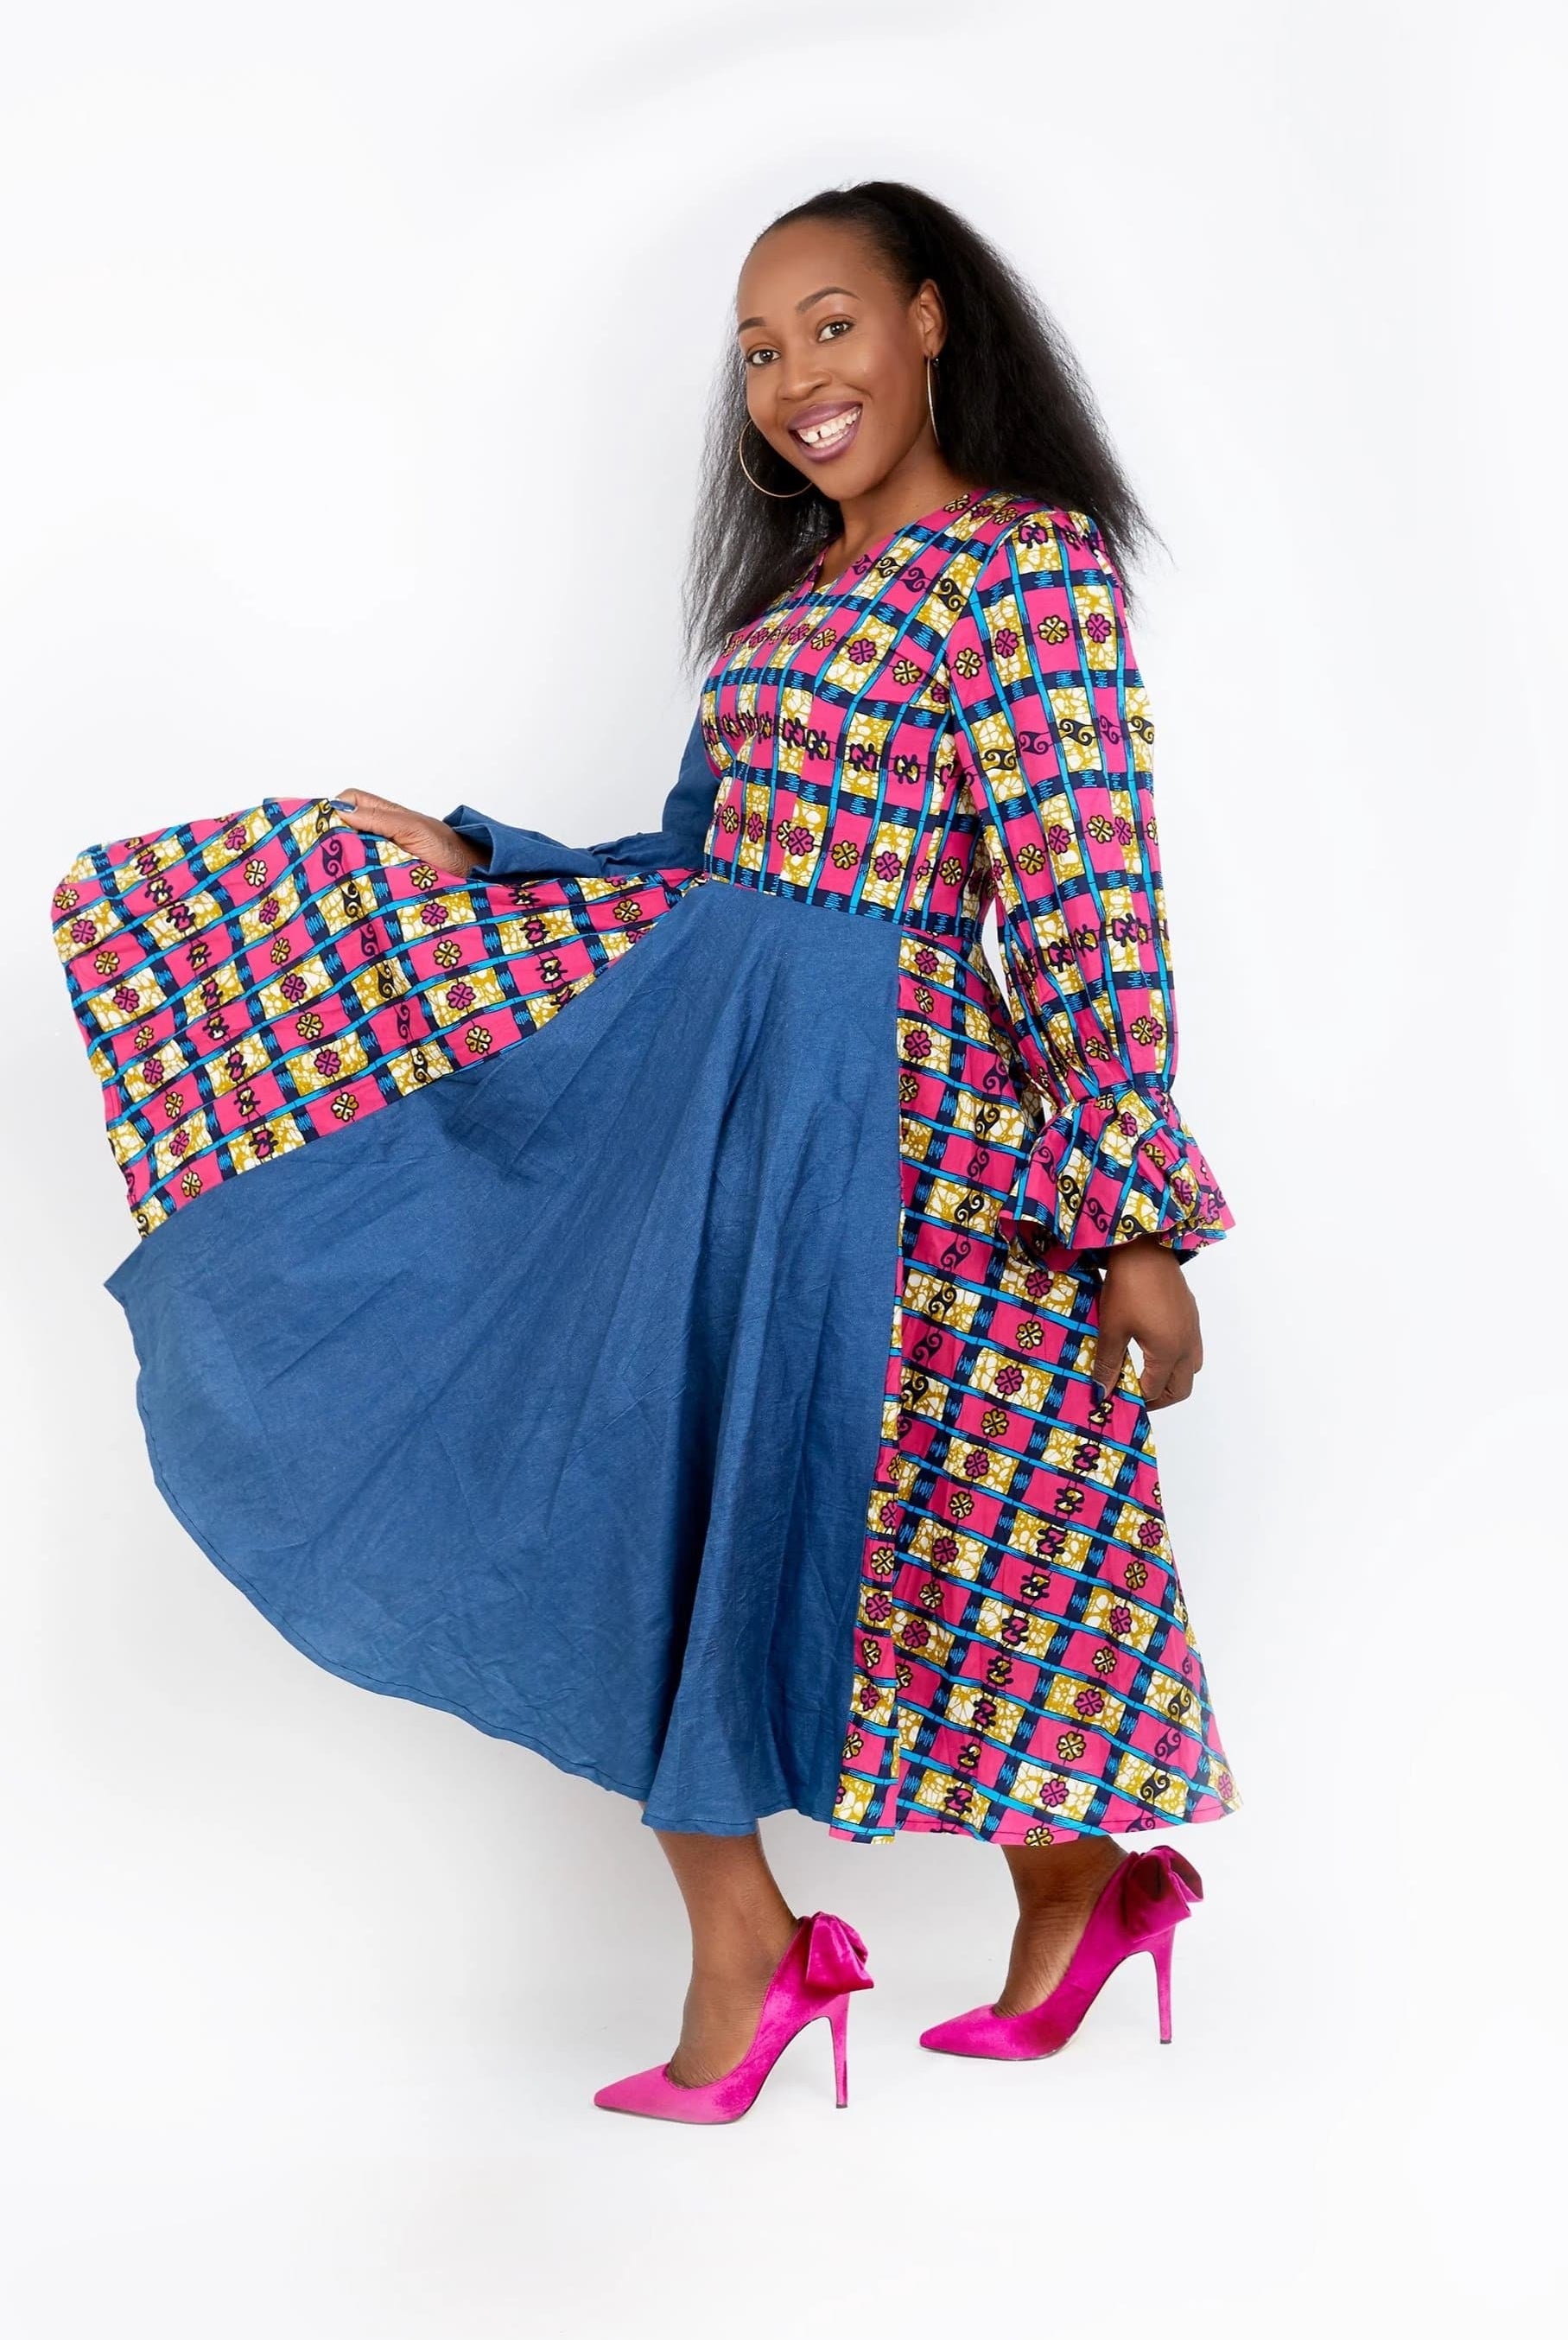 African dress for plus size women | African print clothing in the UK | Ready to wear African print outfits | African dress styles | African clothing | african outfit | kitenge dresses | Africa Dresses for Women | Ankara Styles for ladies | African dresses for work | Danshiki Dress | Ghana African dress | Kente Dress | African dress | African print Dress | African Clothing Online Shop | Short African dress | Mini African dress UK | African dress UK